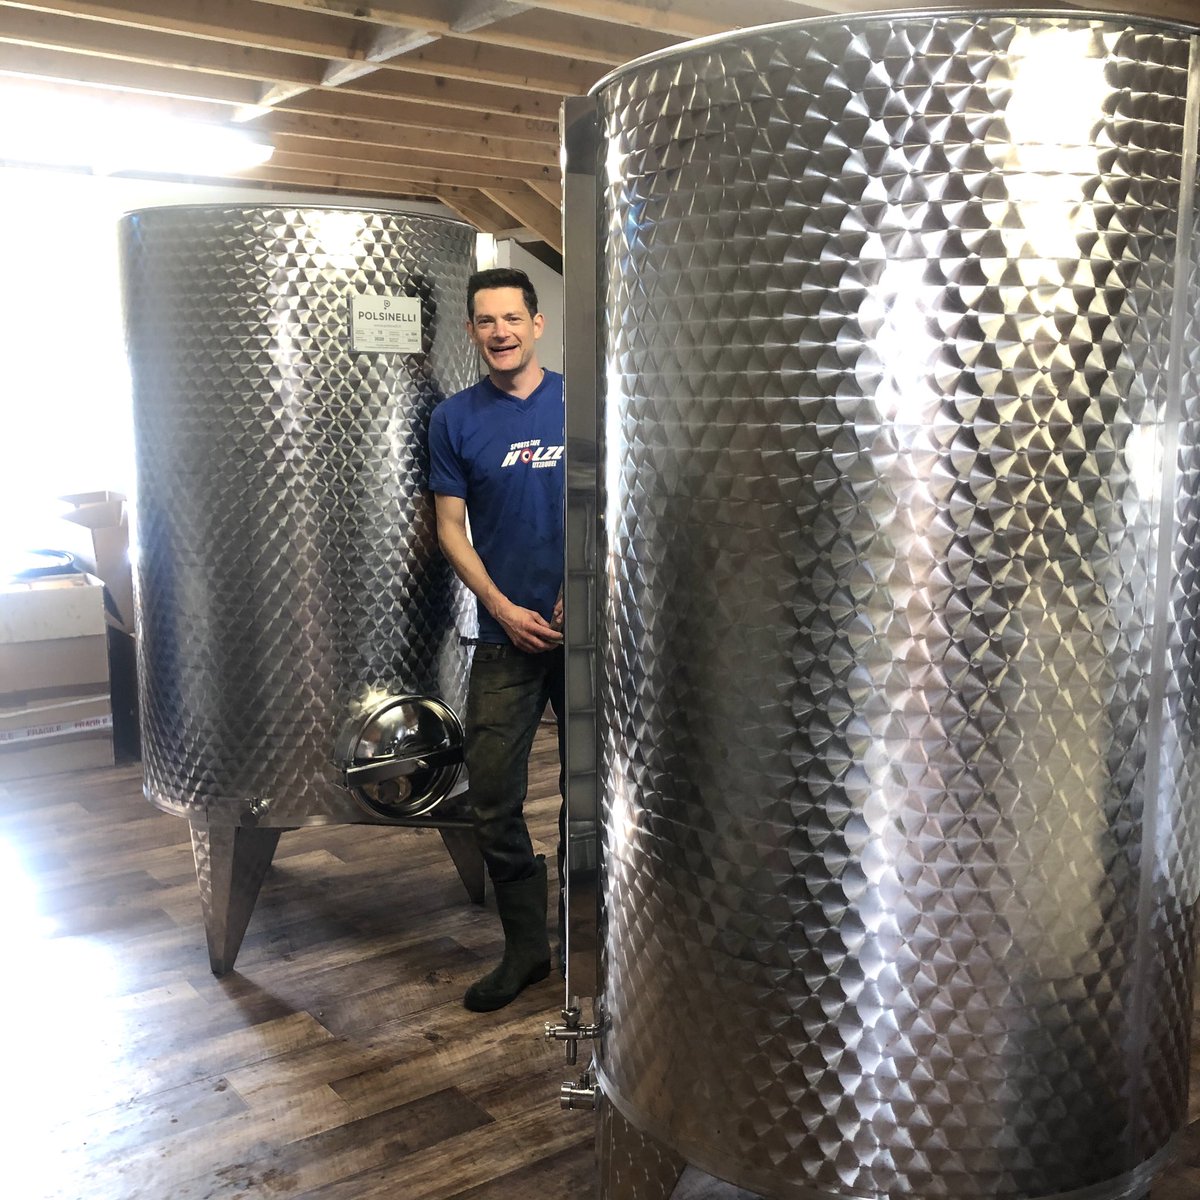 New steel tanks delivered this morning ready to be filled with the 2020 vintage of Rare Apple Ice Wine. 

A good start to the week! 

#irishicewine
#rethinkcider 
#cideriswine